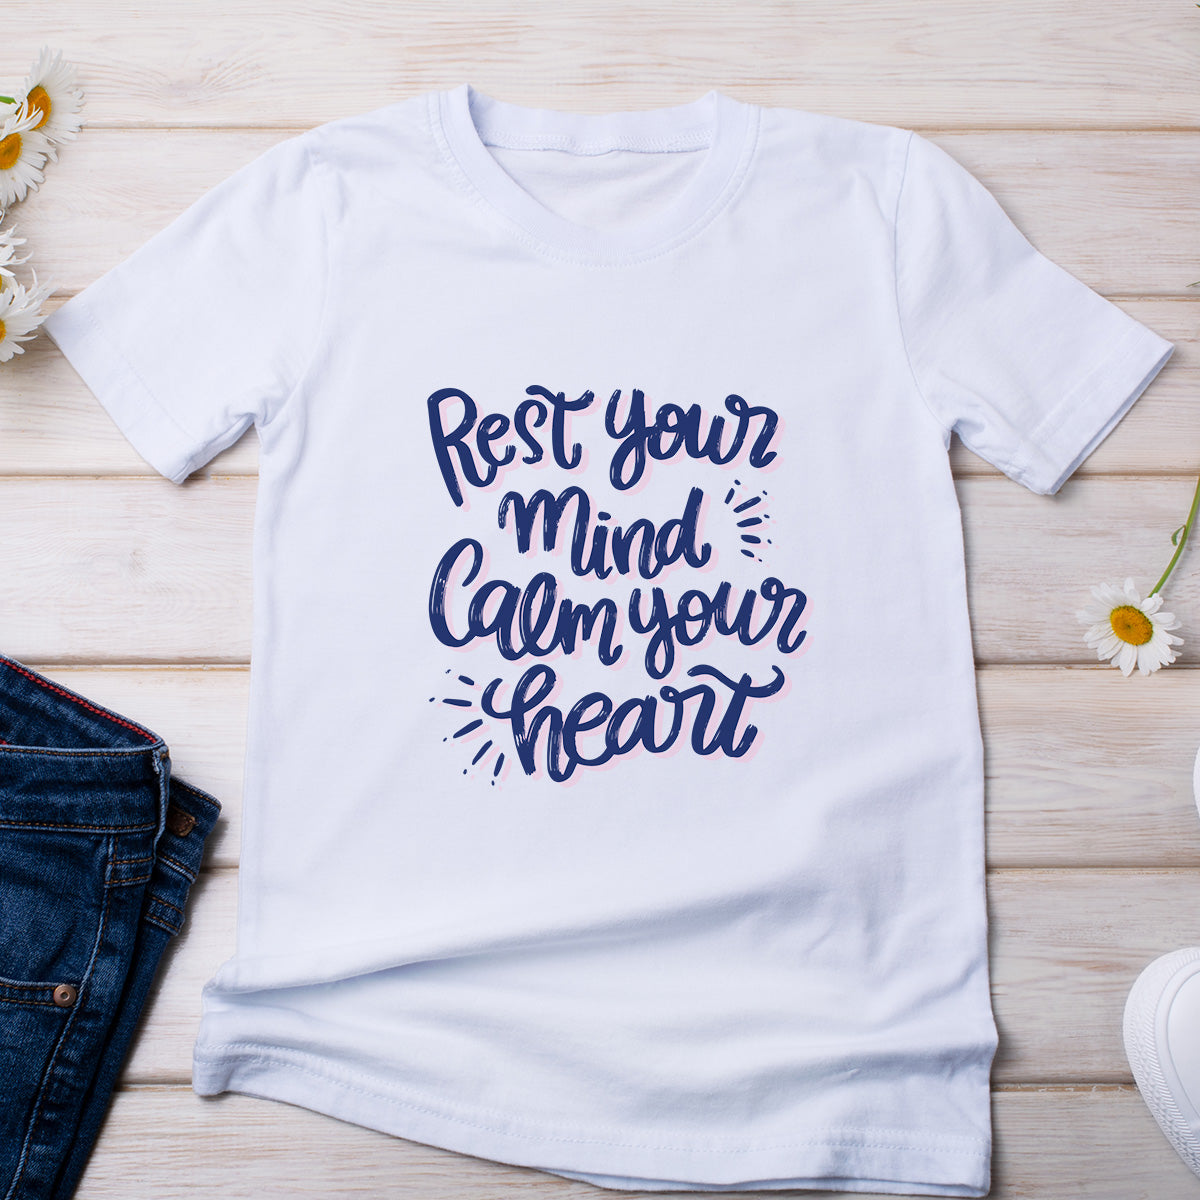 Rest Your Mind Calm Your Heart - Printed Cotton T- Shirt - White